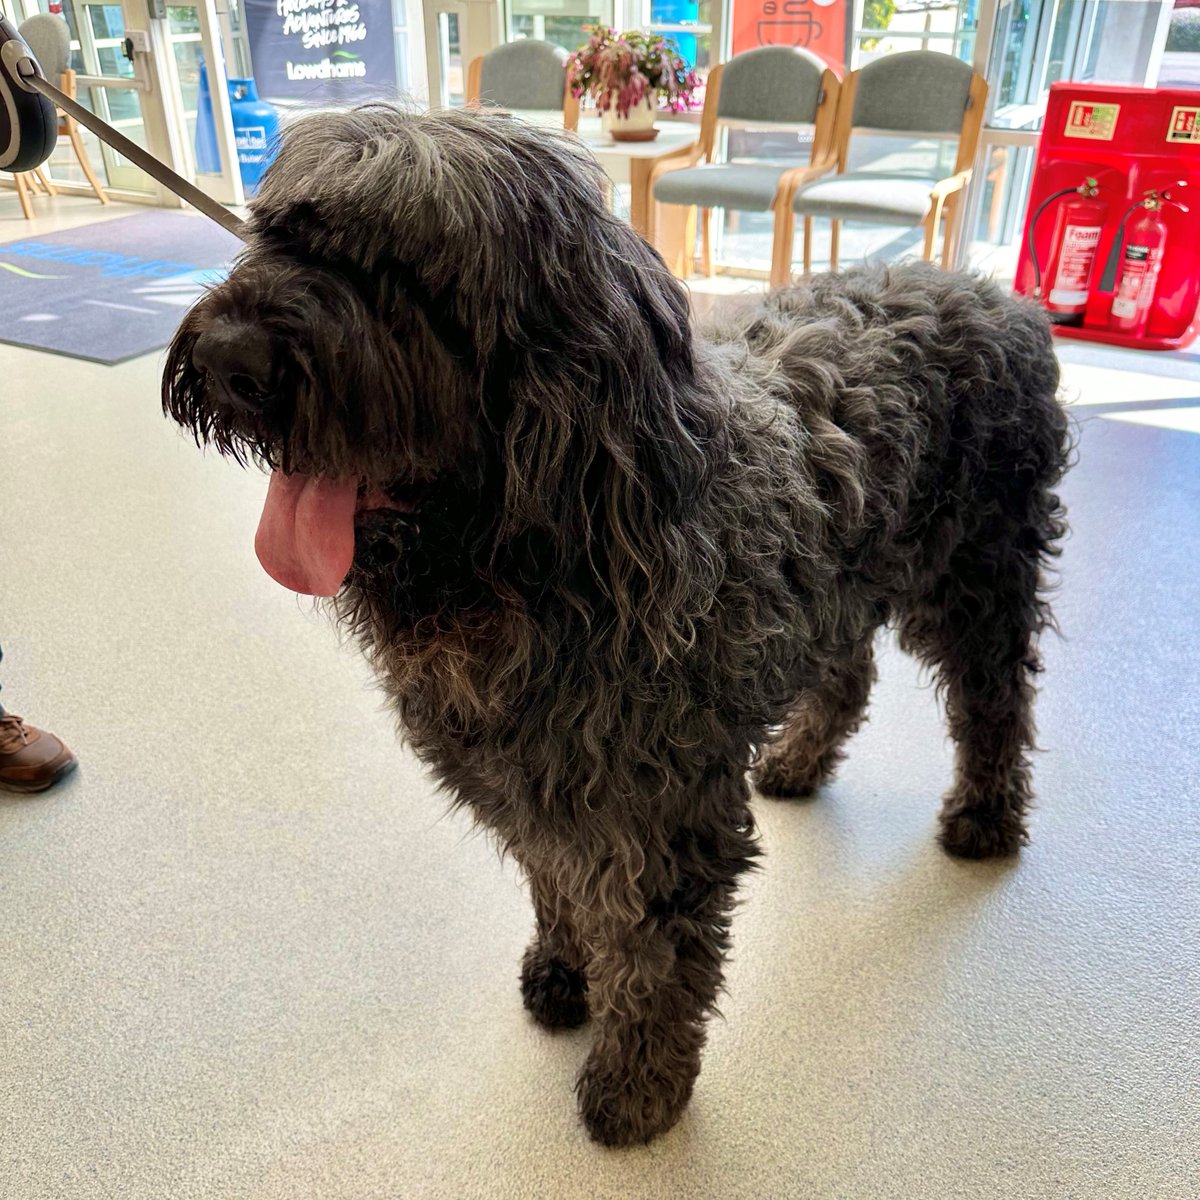 🐾 We had a very fluffy visitor in our showroom this morning! 🐾

Nelson is a gorgeous Russian Terrier who came to say hello with his paw-rents earlier on today! 🐶

#mylowdhams #nottinghamshire #lowdhams #customerstories  #dogsoflowdhams #dogs #pawrents #russianterrier